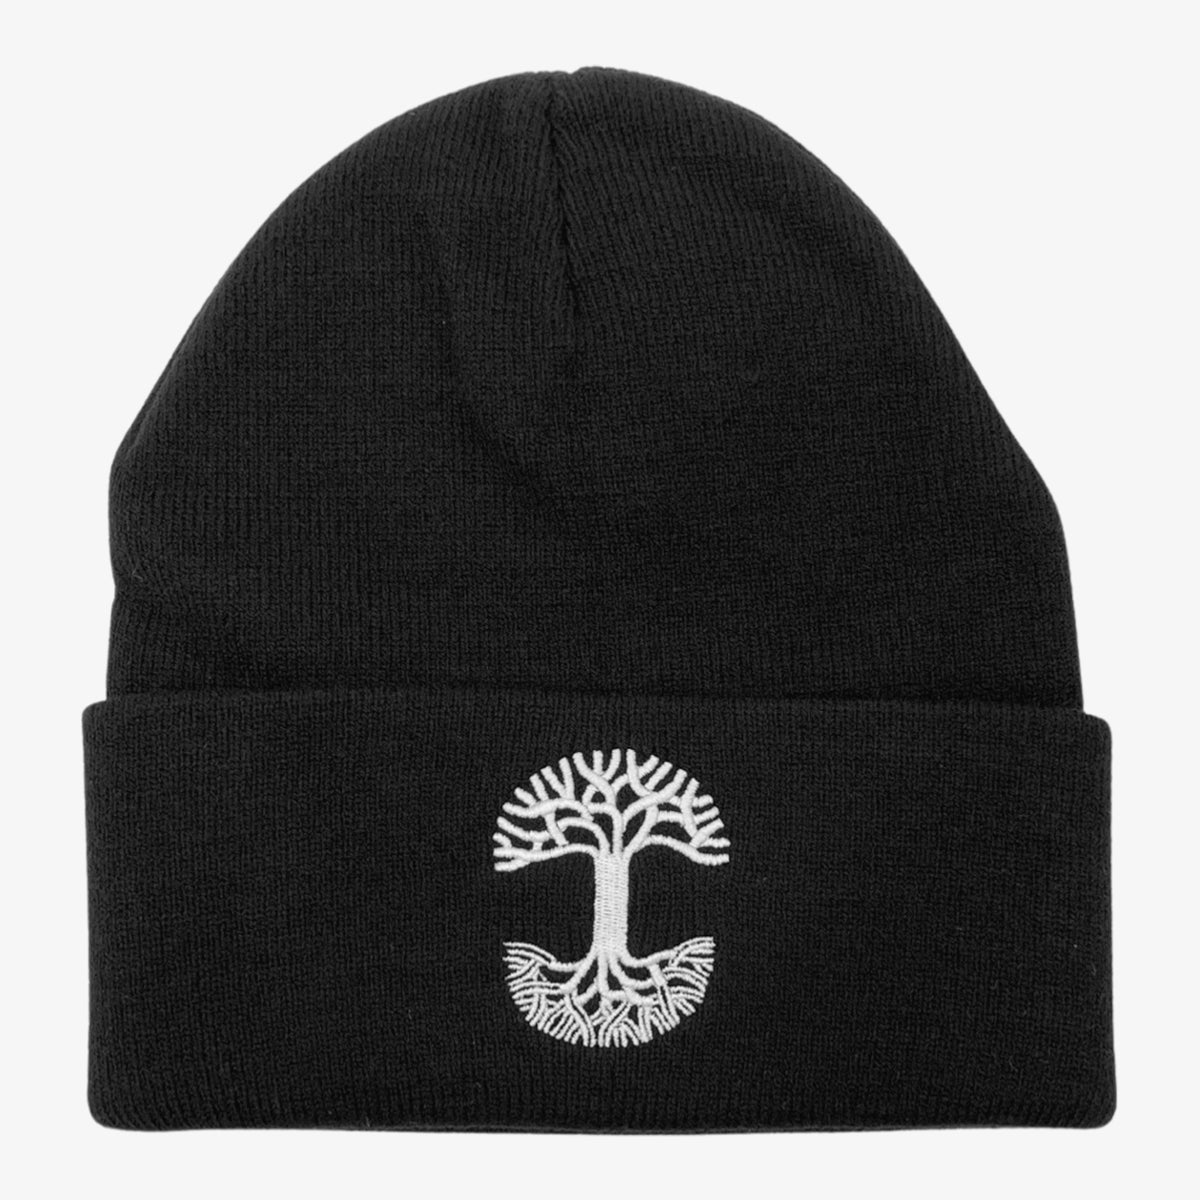 Black woven cuffed beanie with white embroidered Oaklandish tree logo on the cuff.